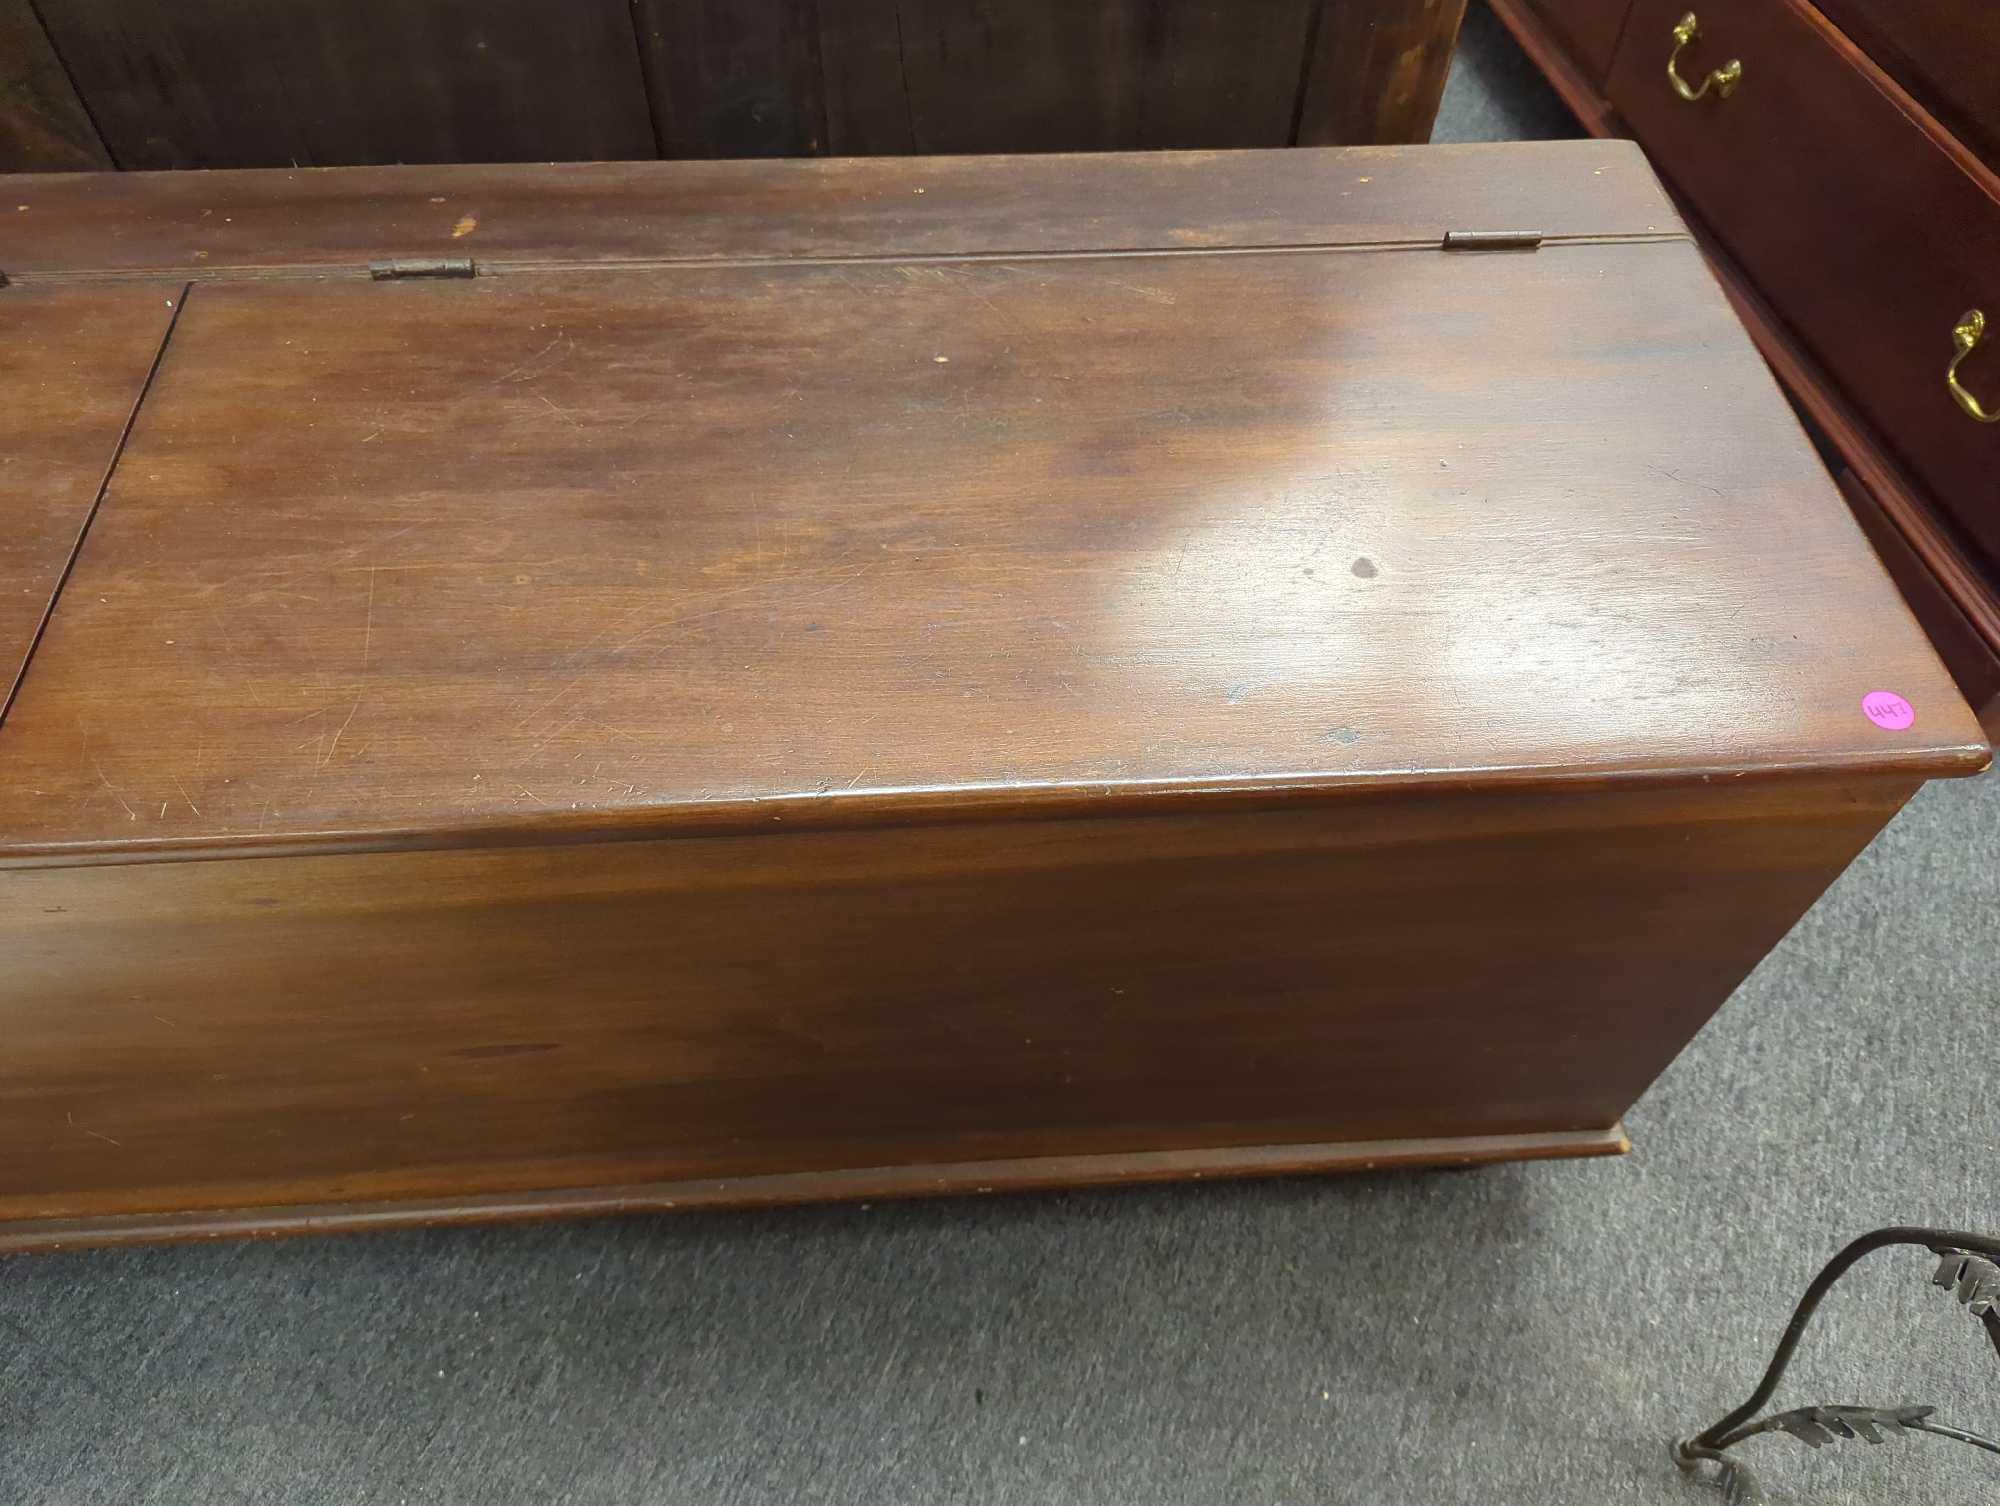 Early Style Mahogany Wood 2 Lid Trunk with A Breaker in The Center, Is in Great Condition Measure